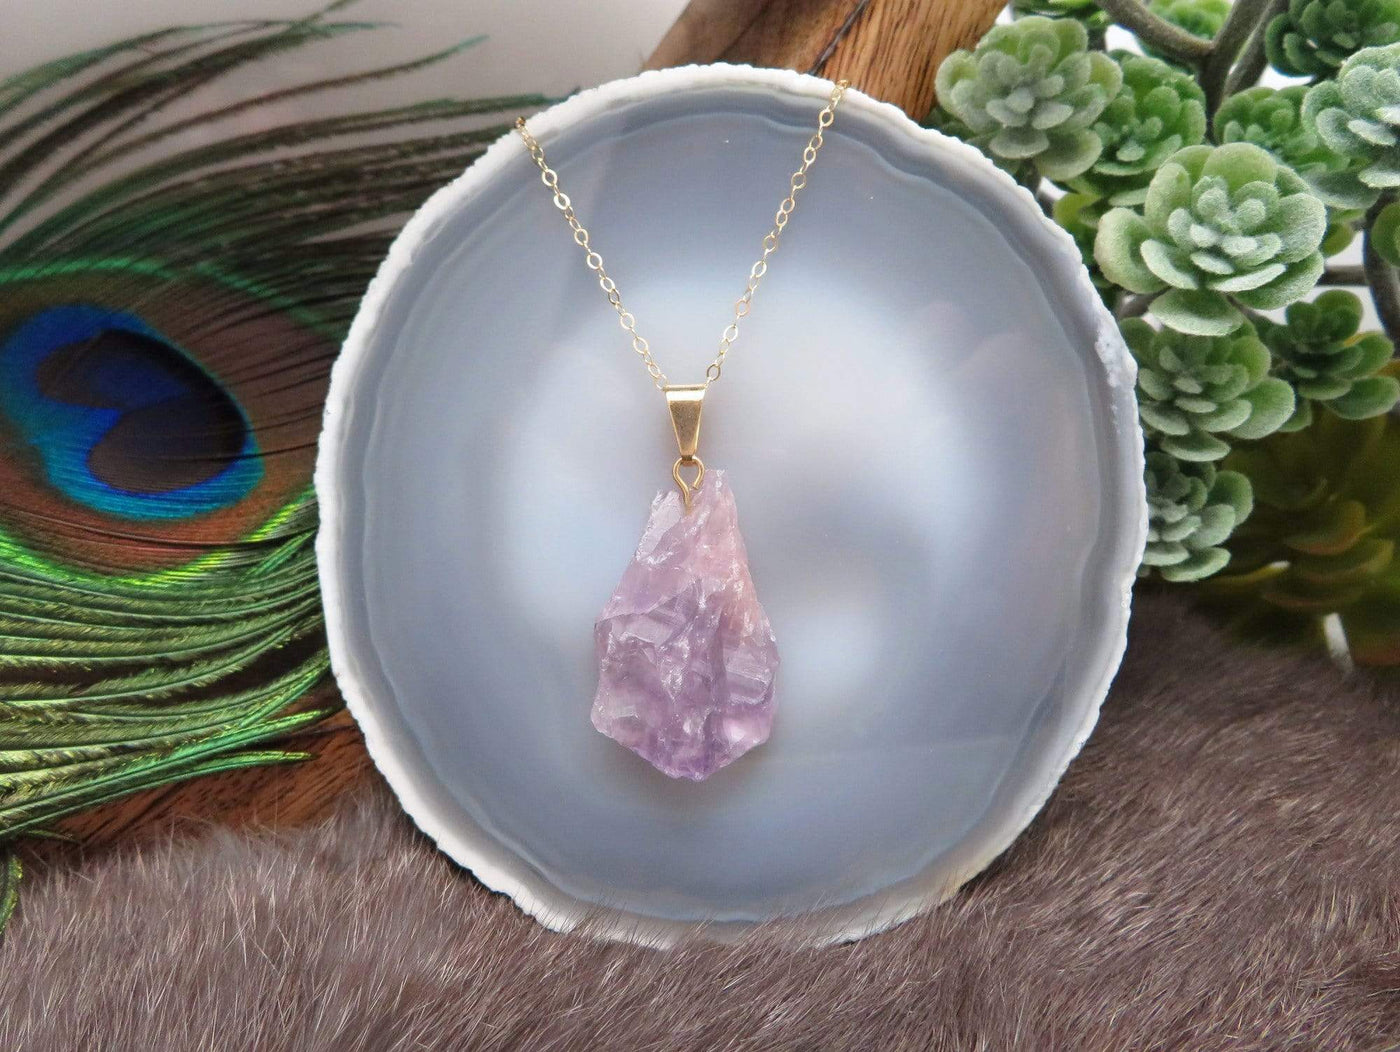 Amethyst rough stone pendant on a gold chain hung from an agate slice.